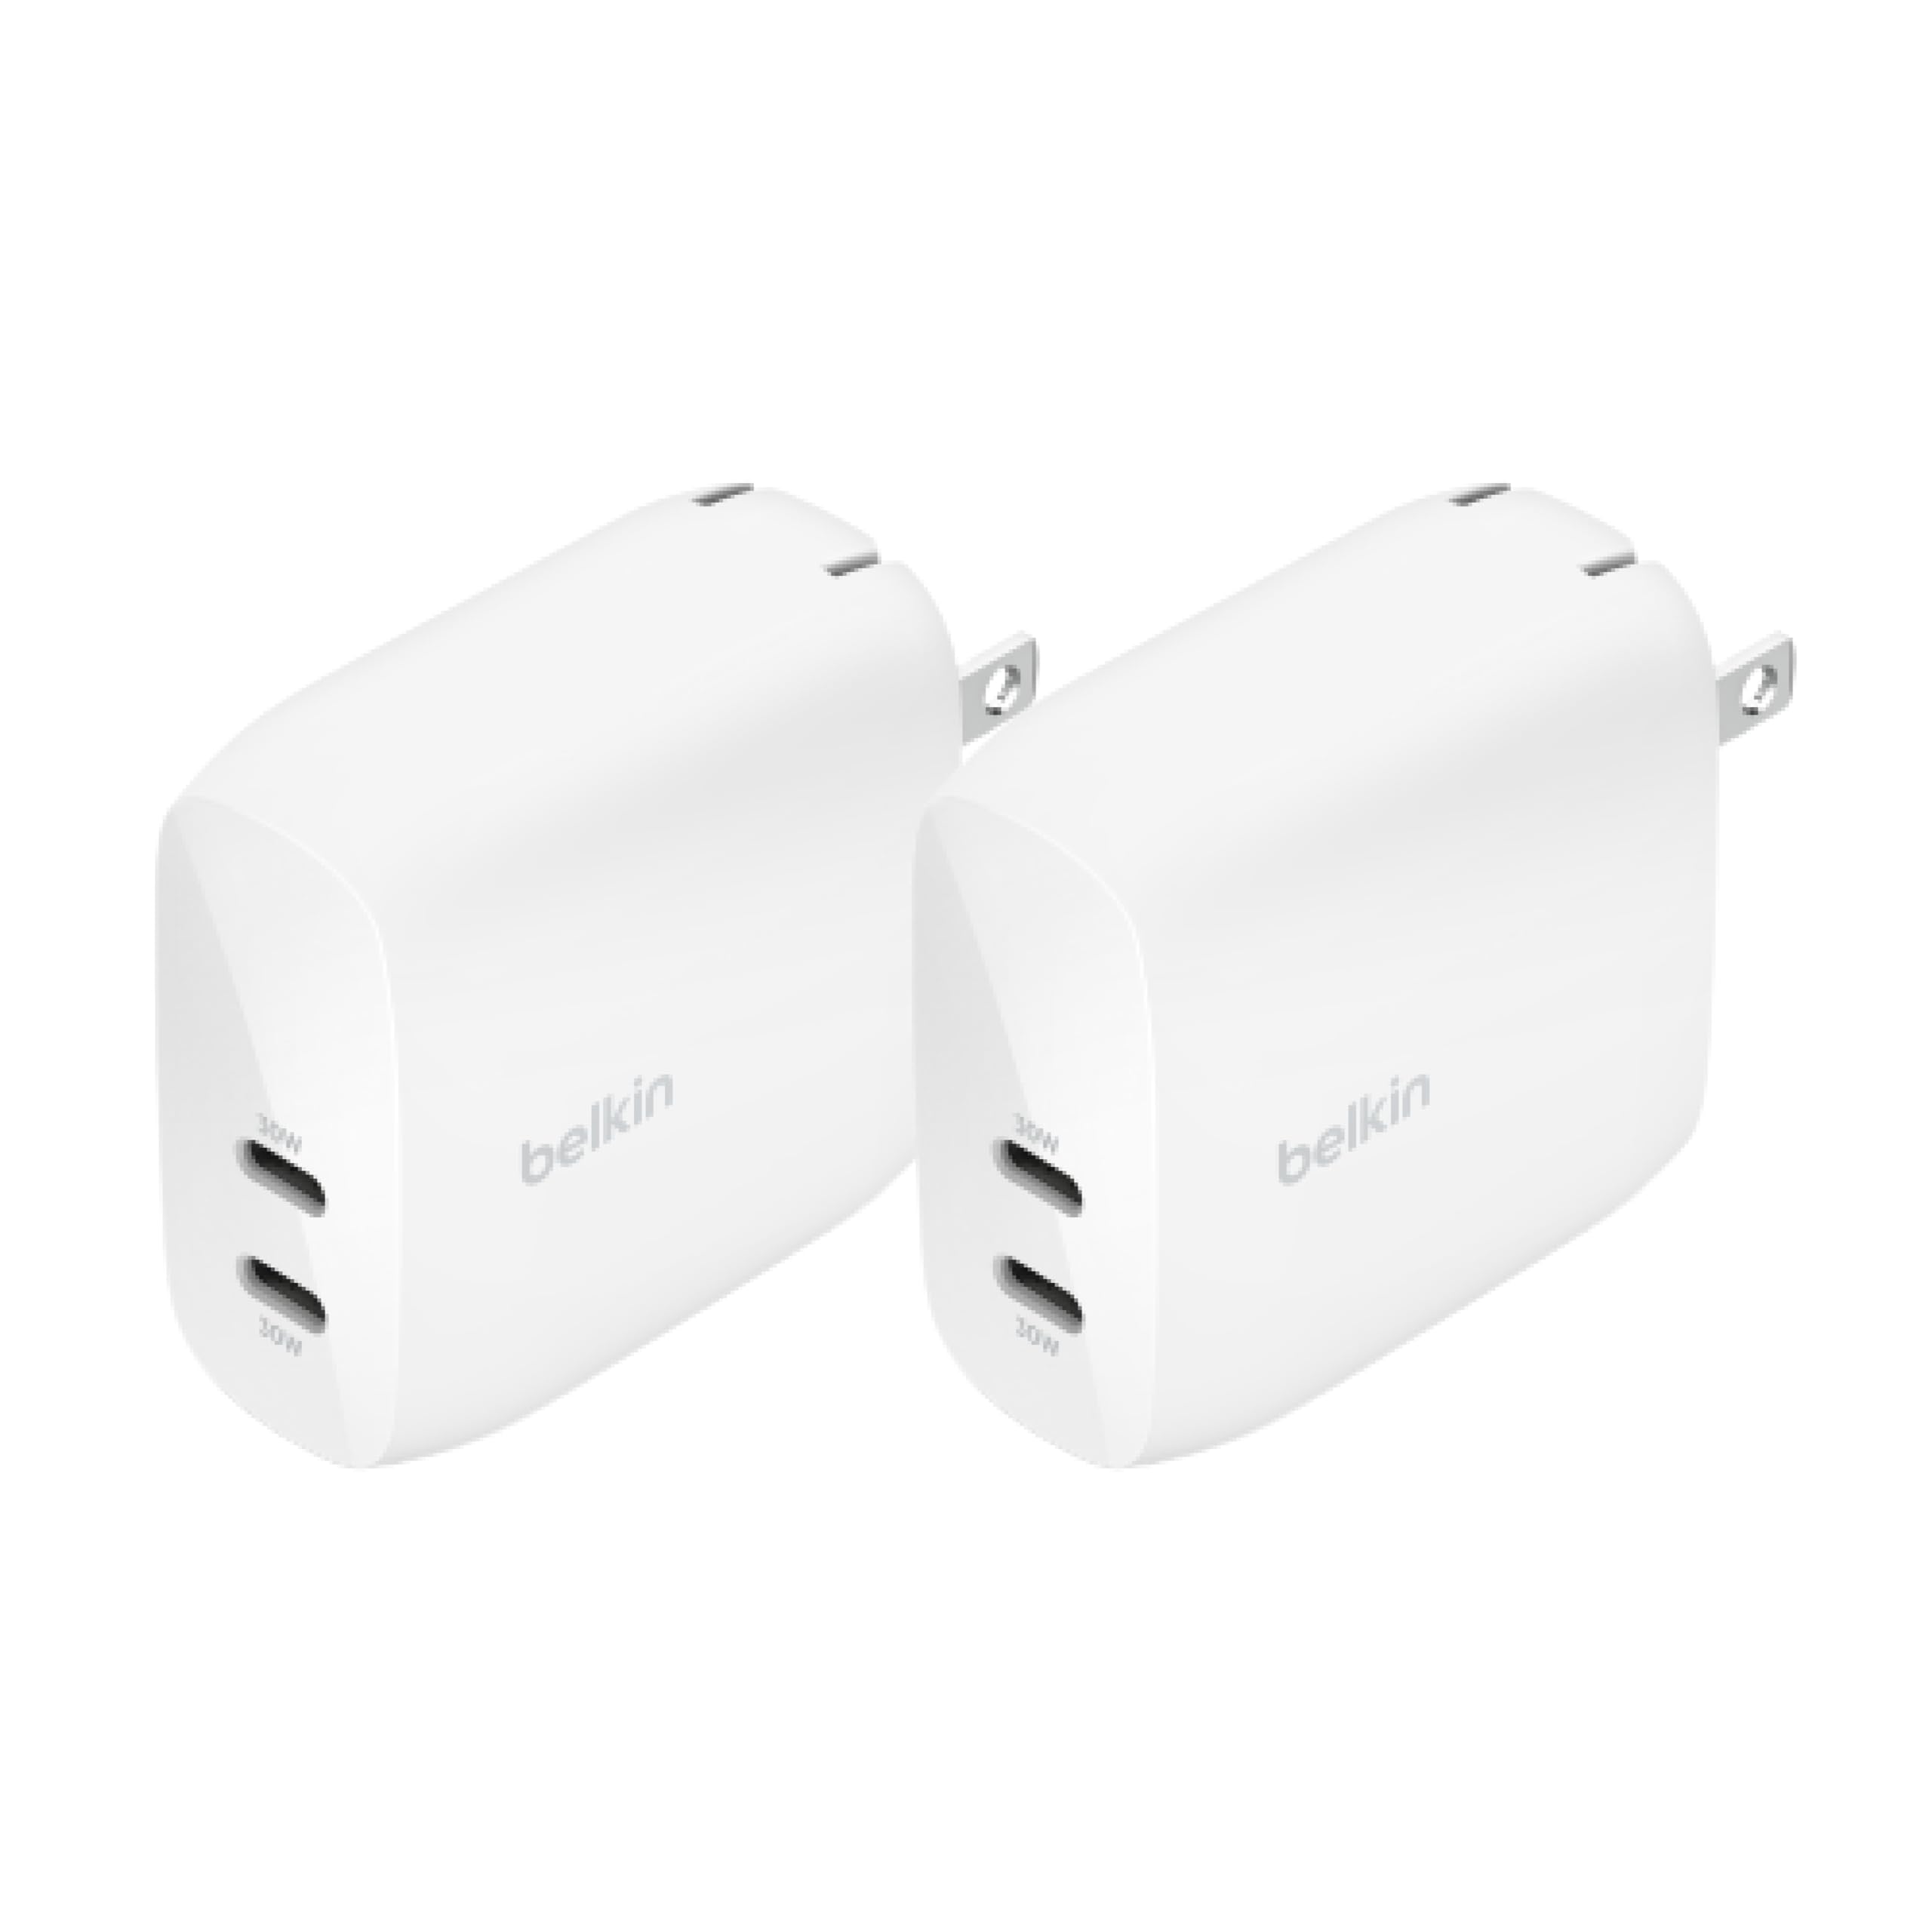 Belkin BoostCharge Dual USB-C Wall Charger with PPS 60W for Apple iPhone, iPad, Samsung Galaxy, Google Pixel - Compatible w/USB-C to Lightning Cable & USB-C to USB-C - White (2-Pack)